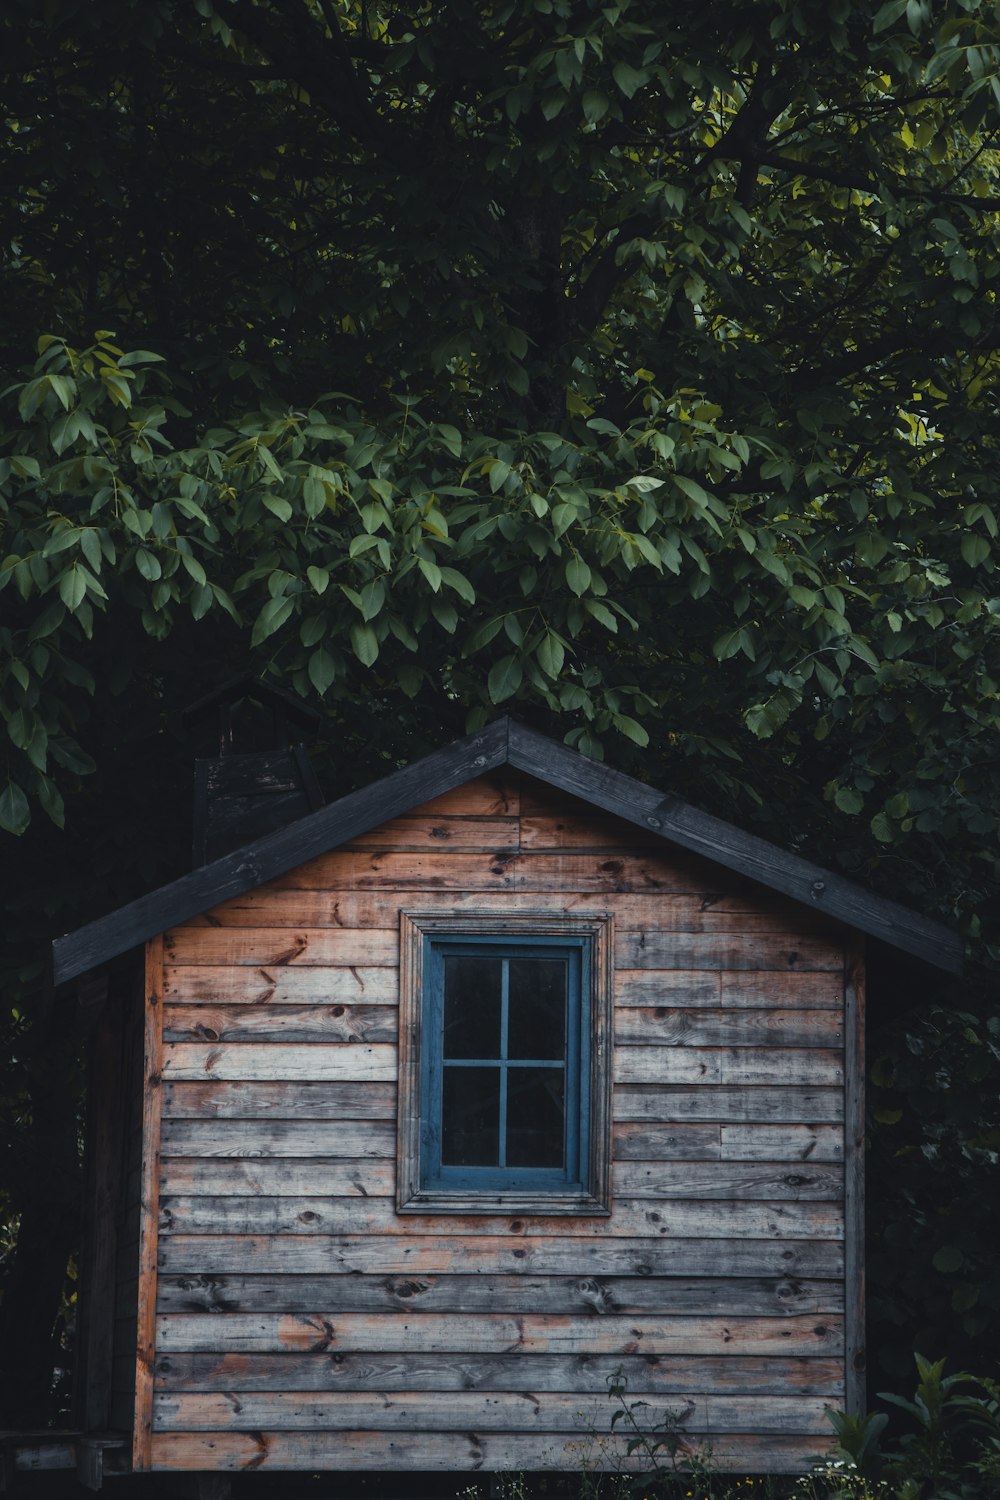 a small wooden cabin with a blue window